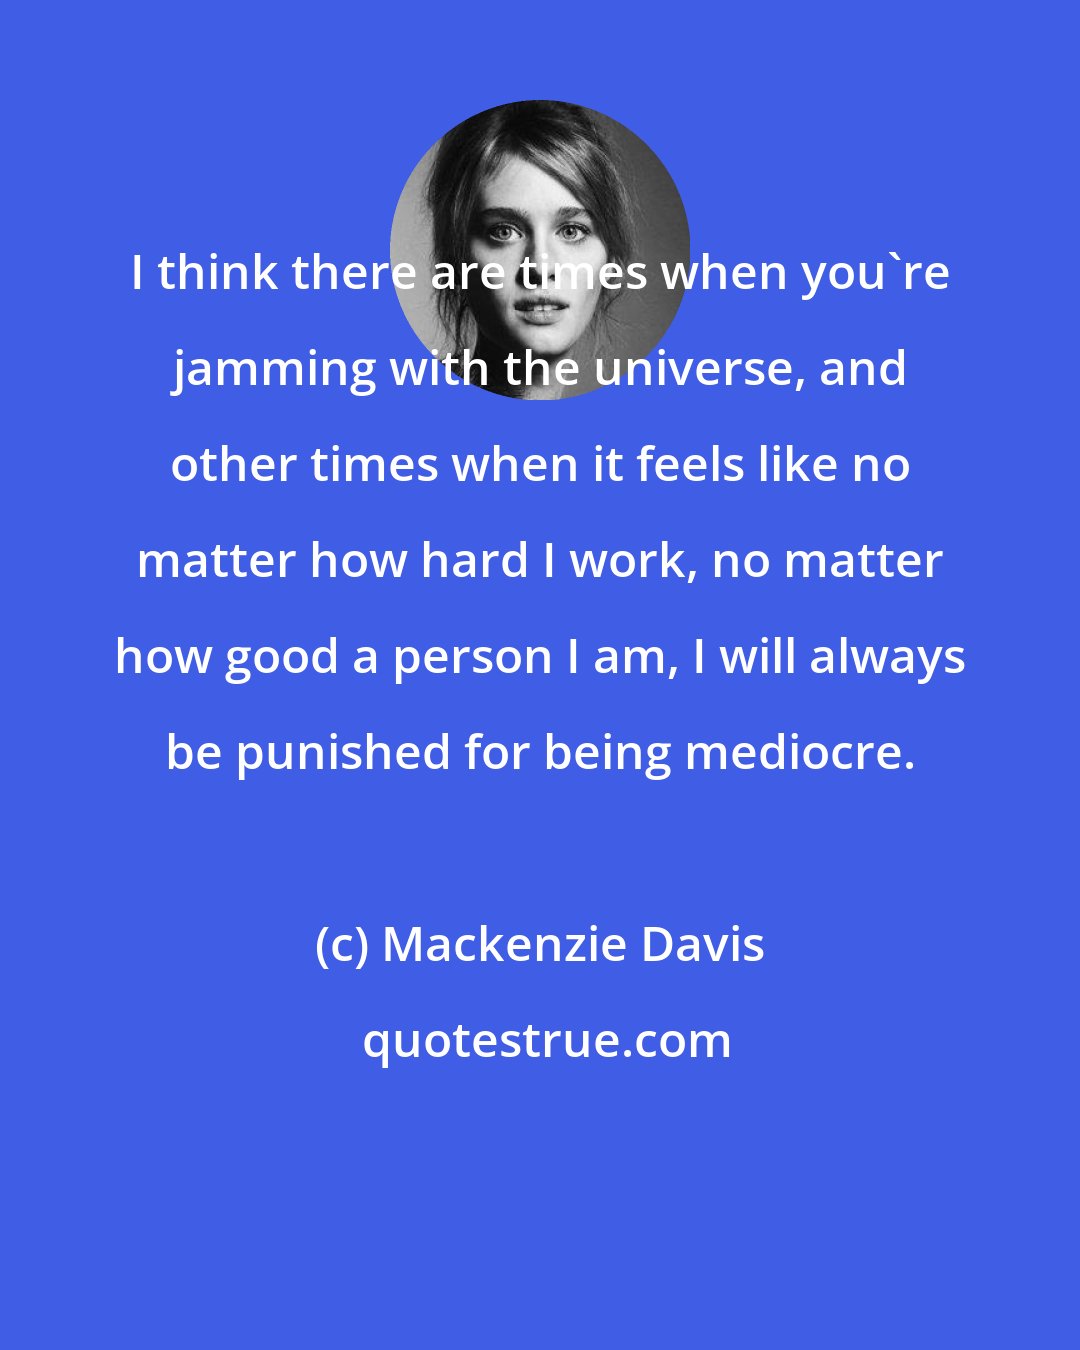 Mackenzie Davis: I think there are times when you're jamming with the universe, and other times when it feels like no matter how hard I work, no matter how good a person I am, I will always be punished for being mediocre.